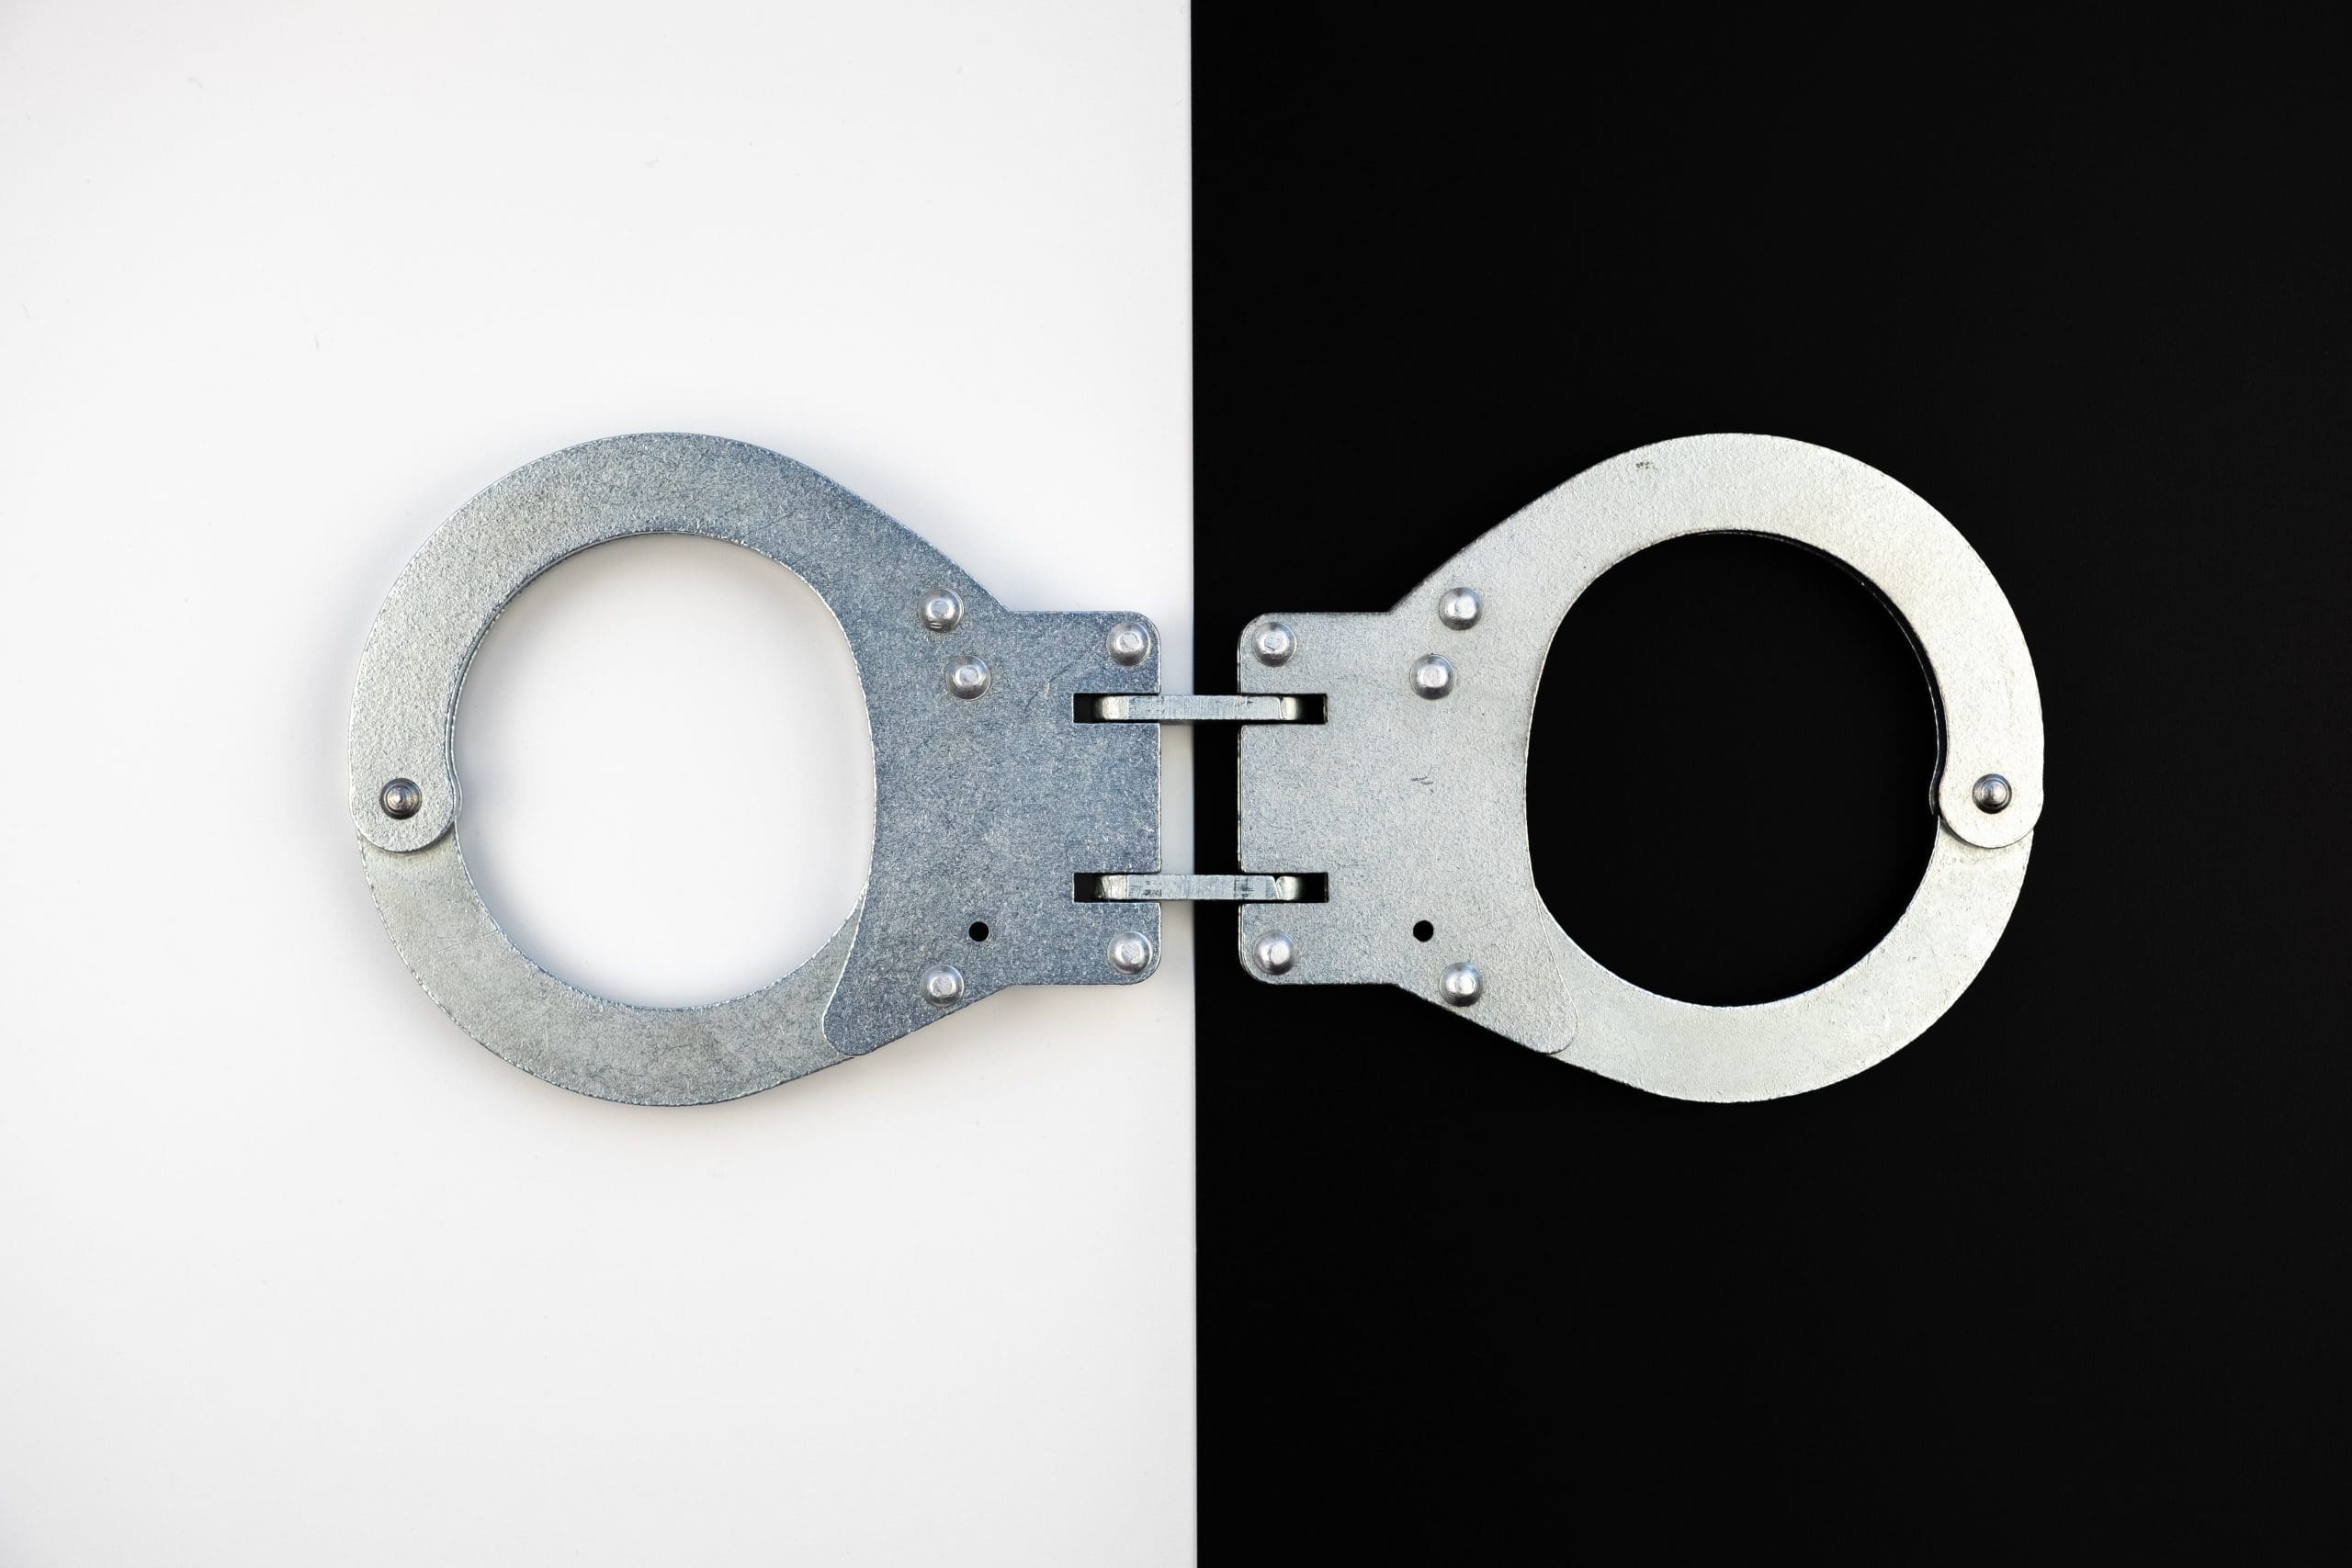 Handcuffs on a black and white background.